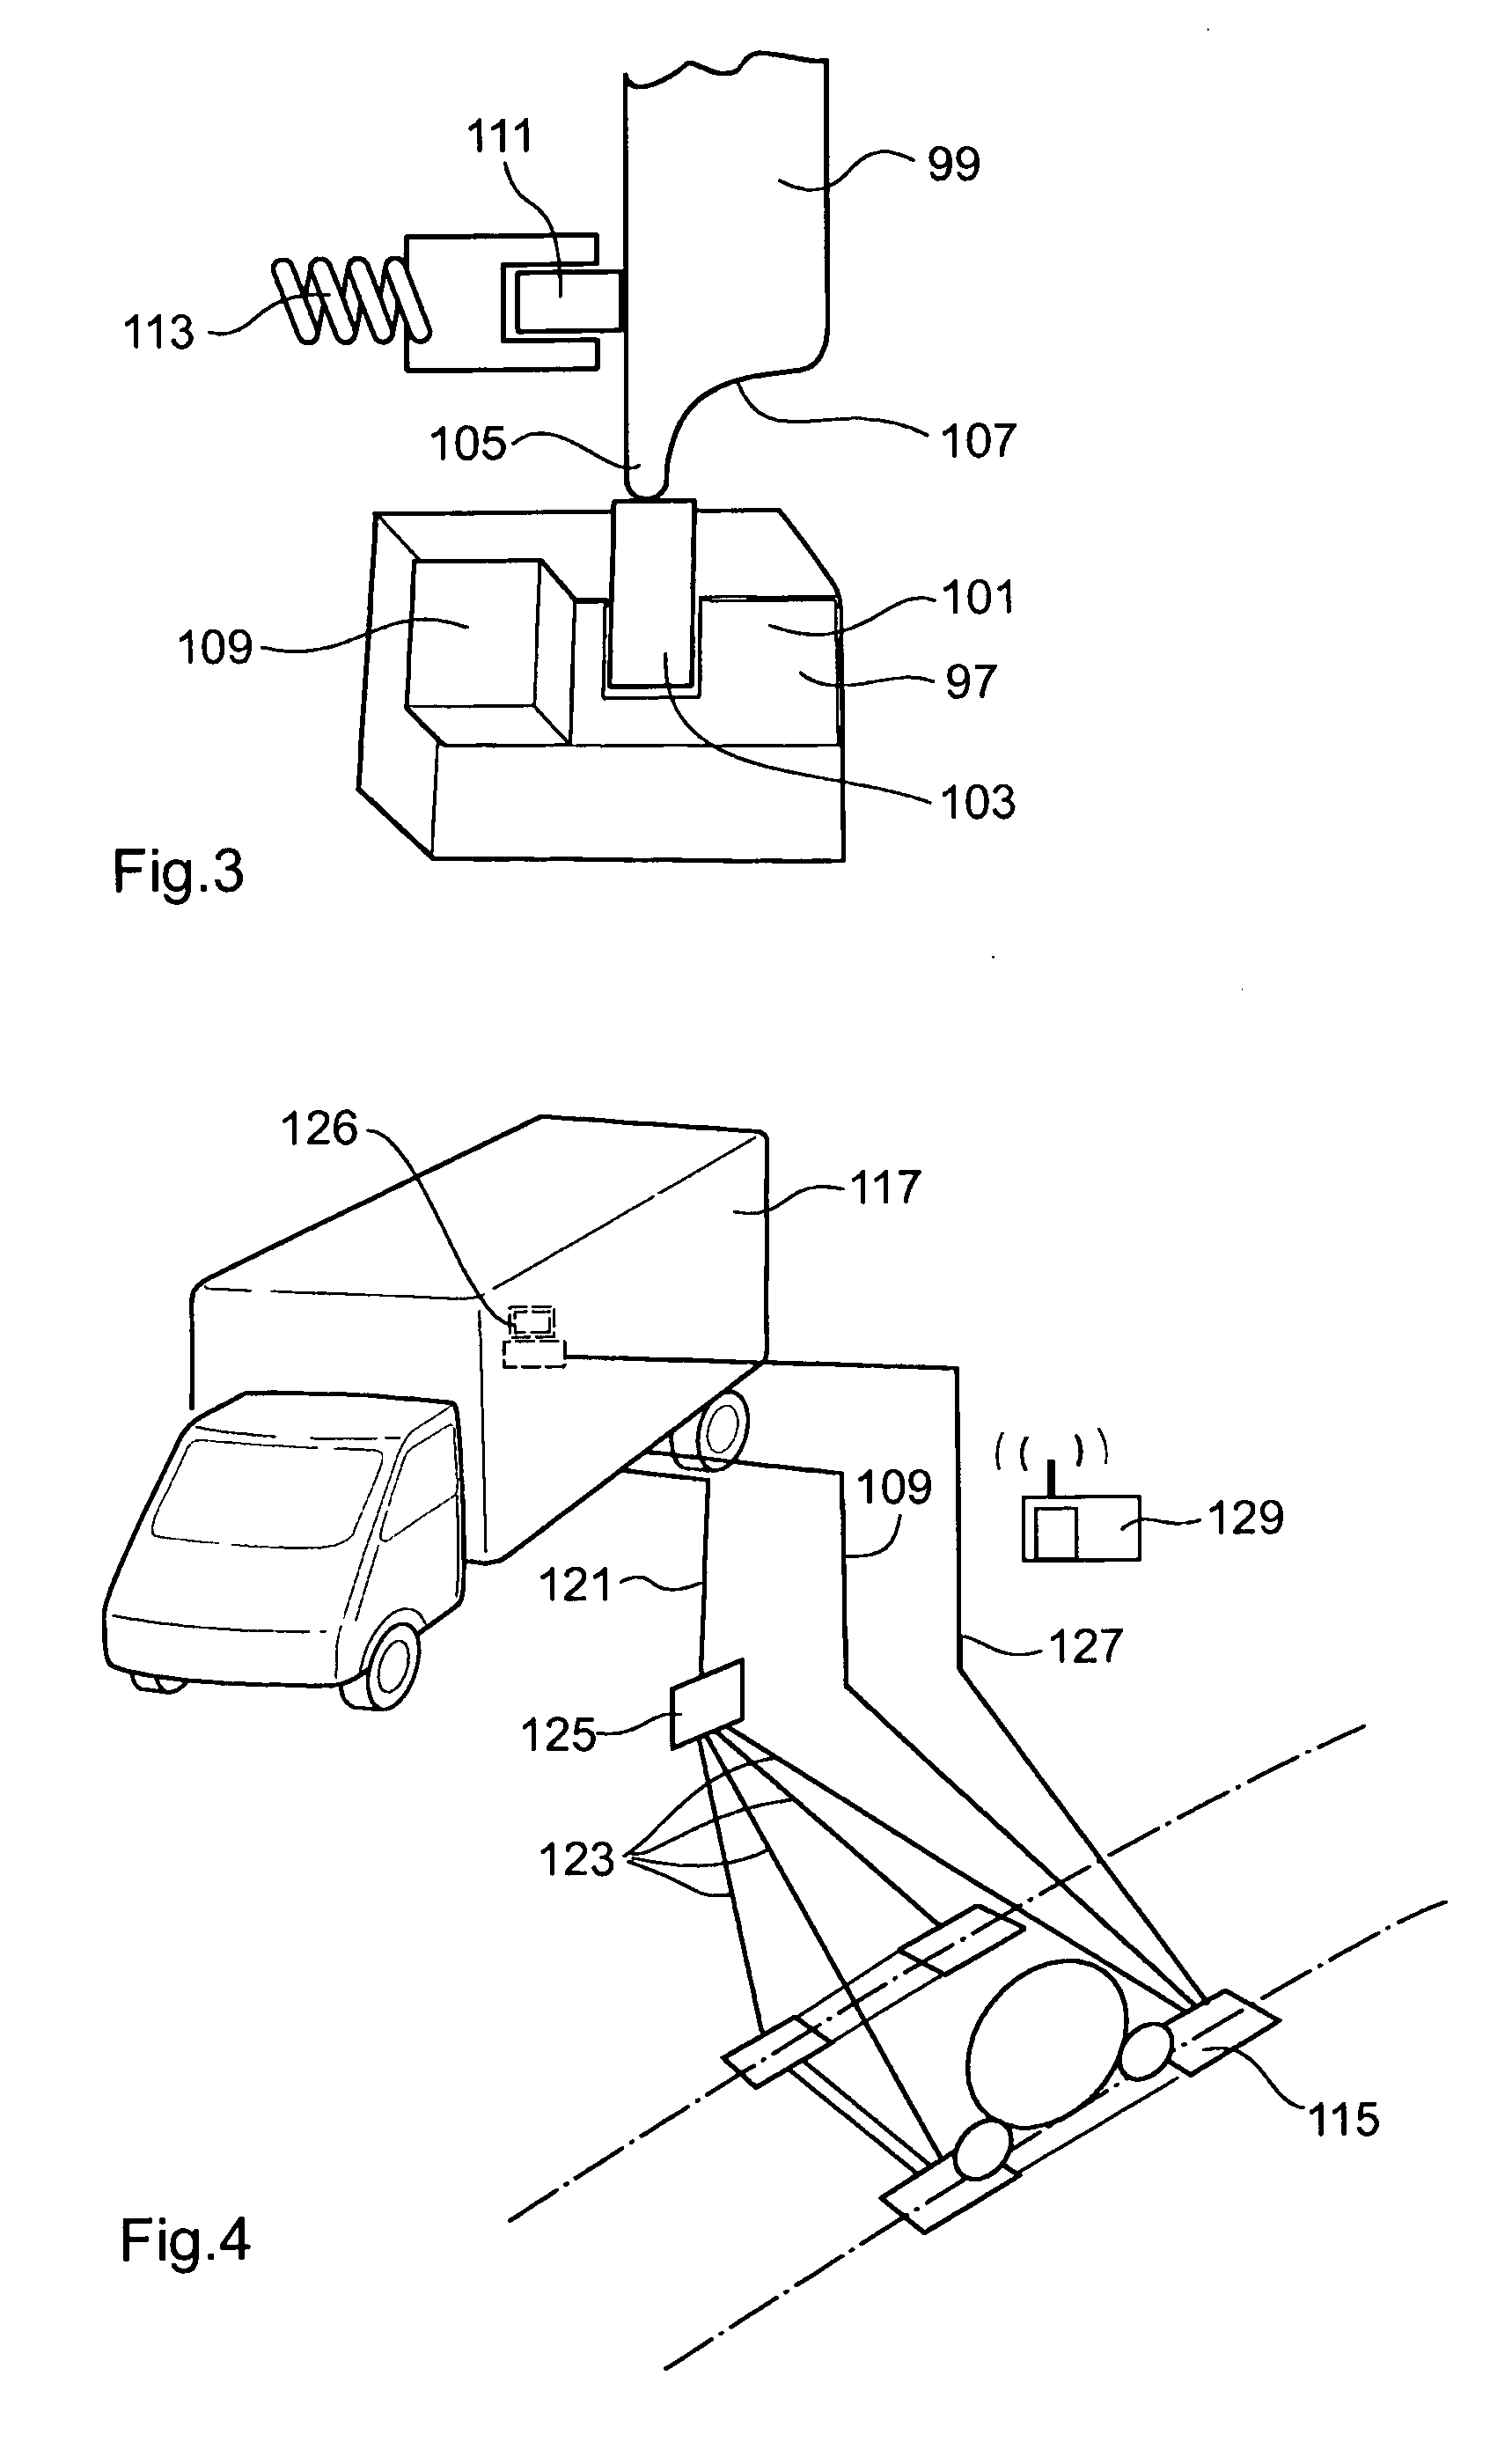 Device for lifting at least one wheel of a railbound vehicle